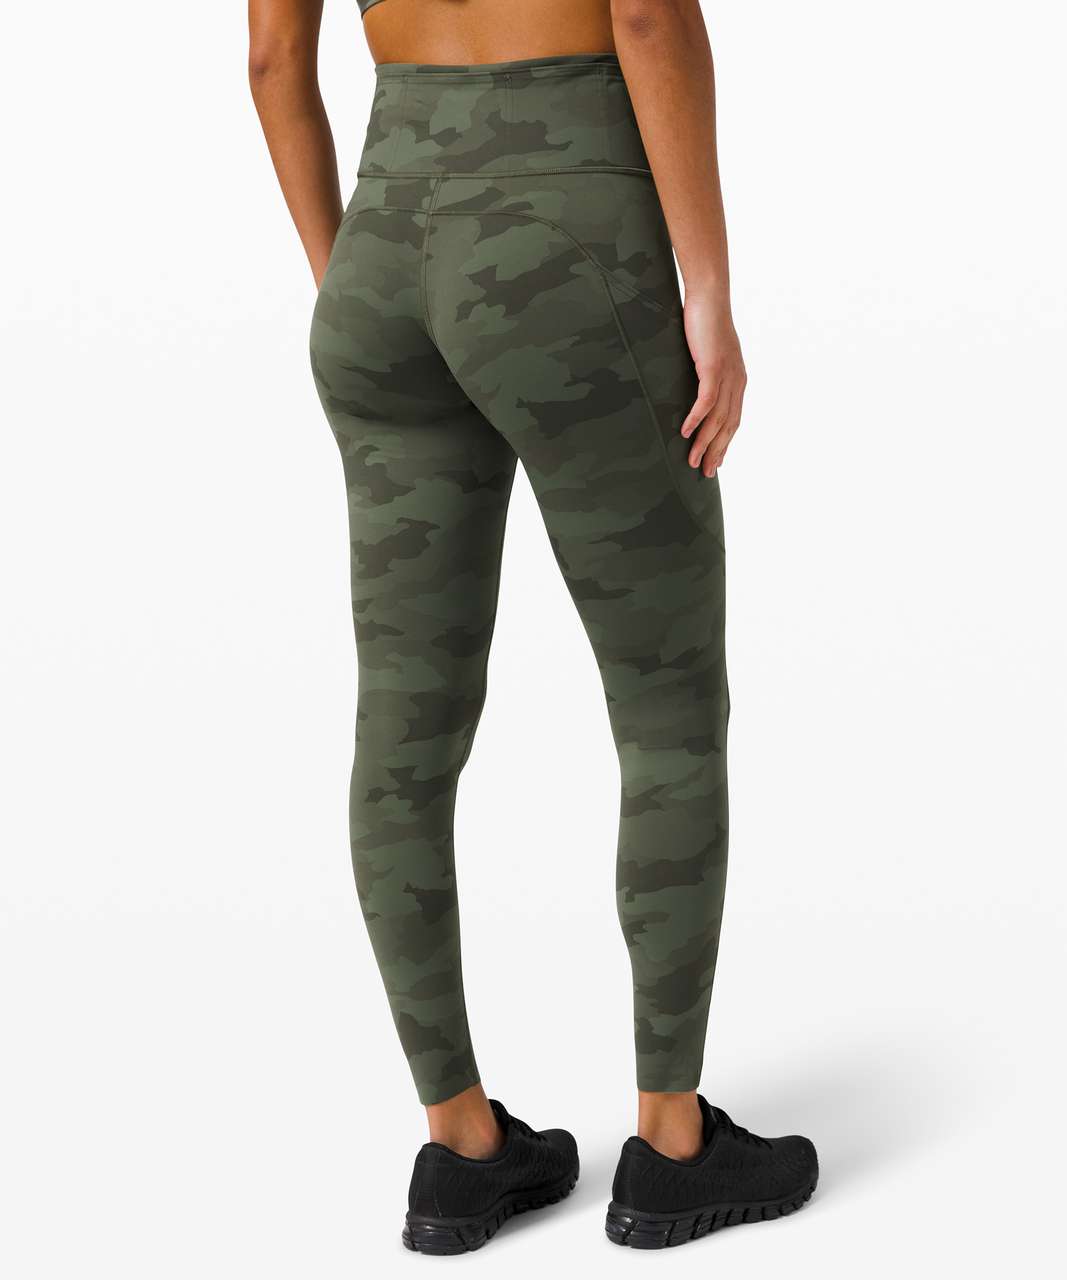 Lululemon Fast and Free High-Rise Tight 28" *Non-Reflective Brushed Nulux - Heritage 365 Camo Green Twill Multi